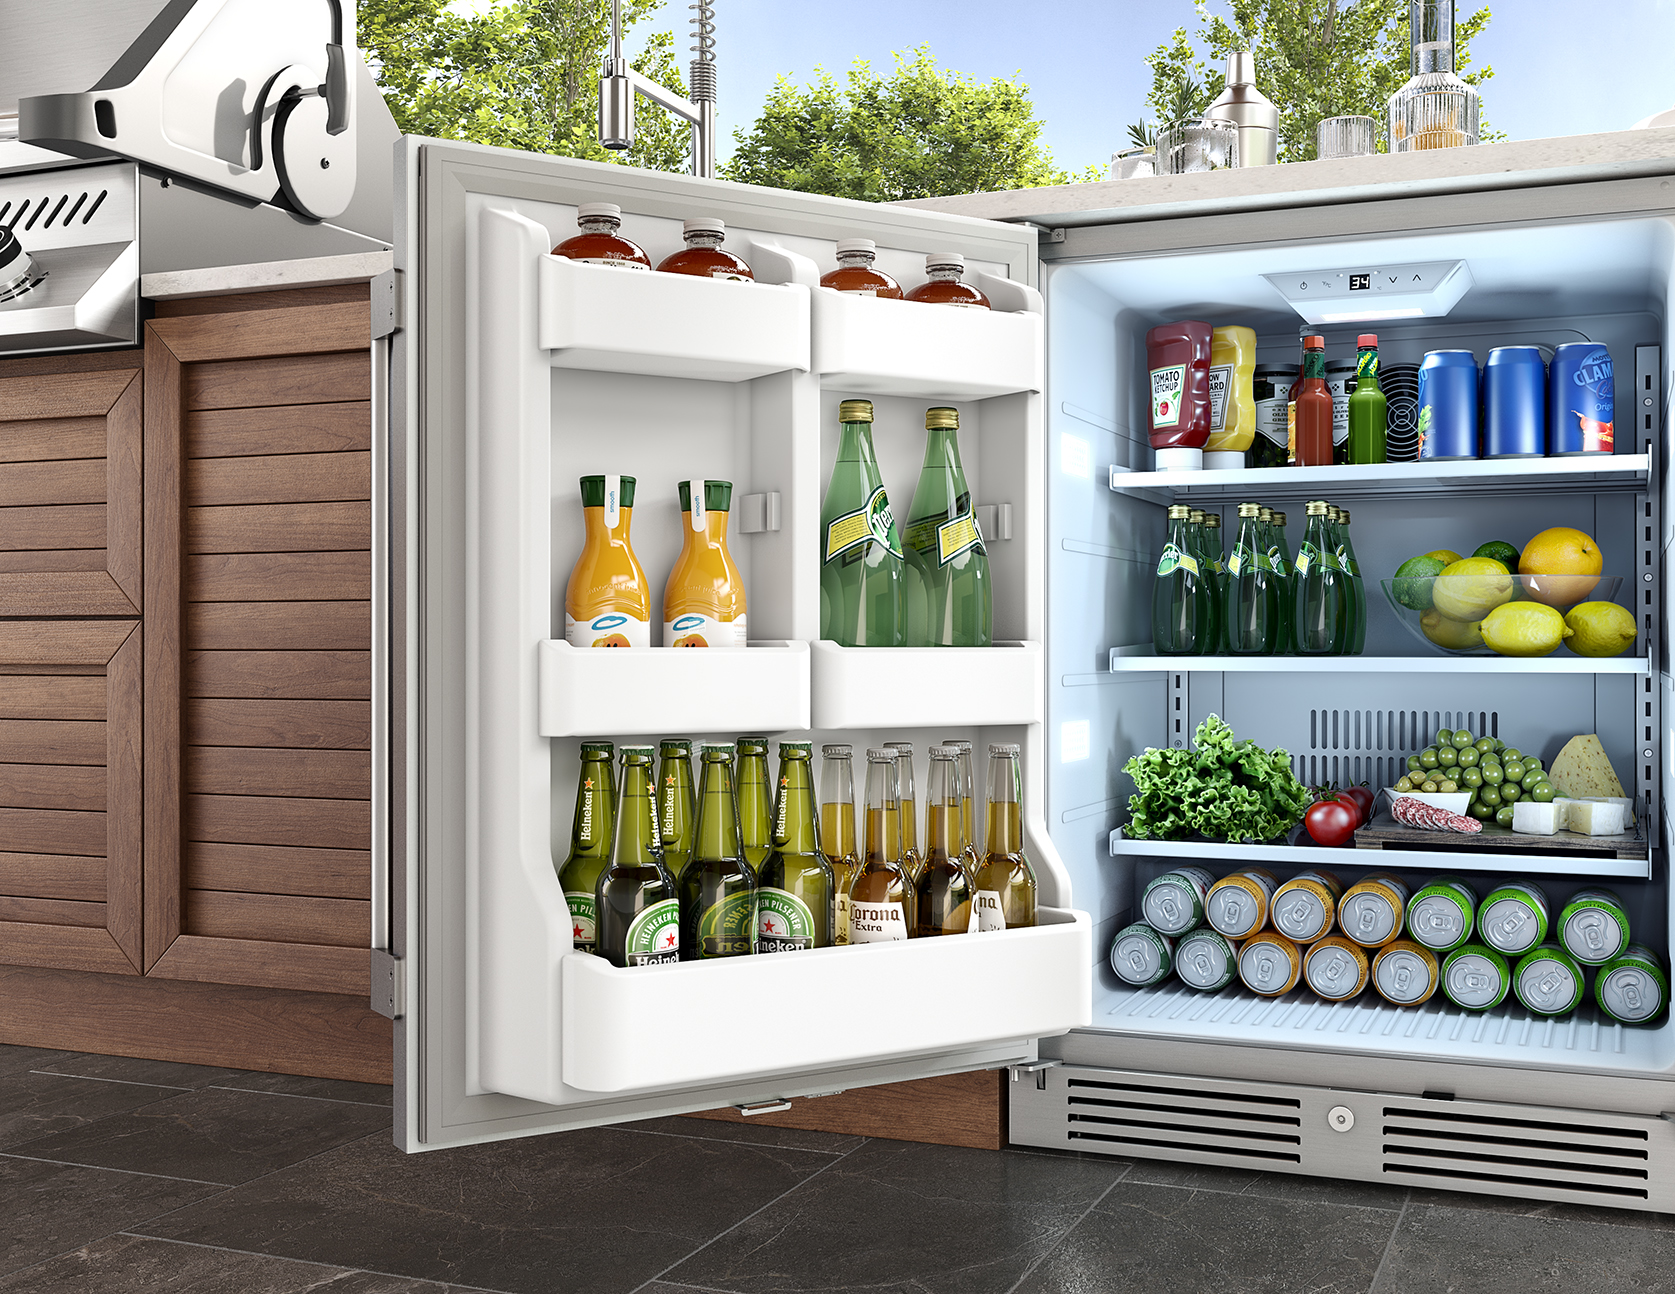 What Is The Best Outdoor Refrigerator? | Fresh Air Blog | Zephyr